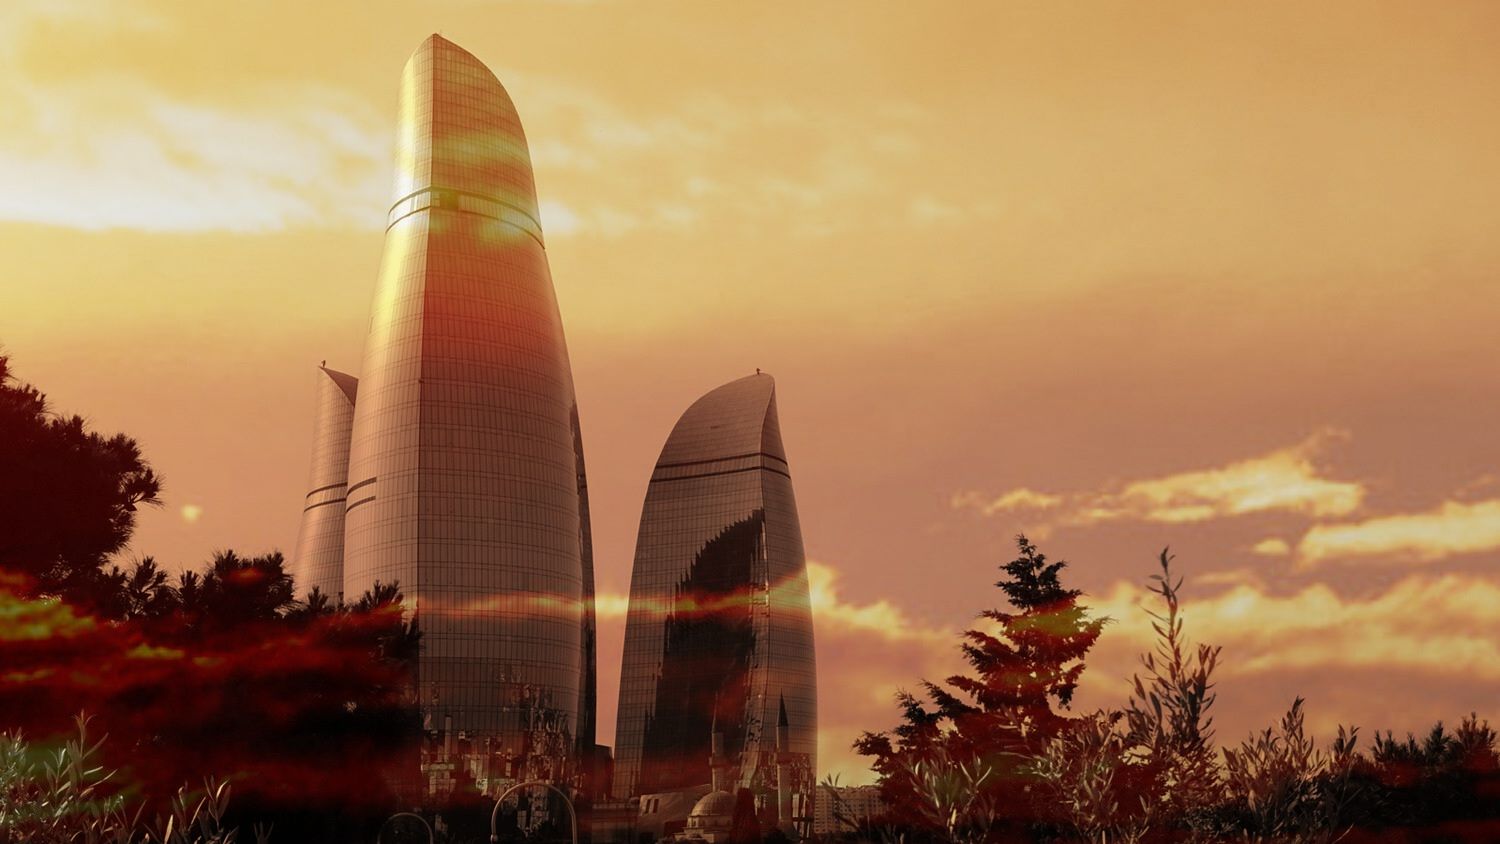 Baku.Flame Towers.Looking out of the window